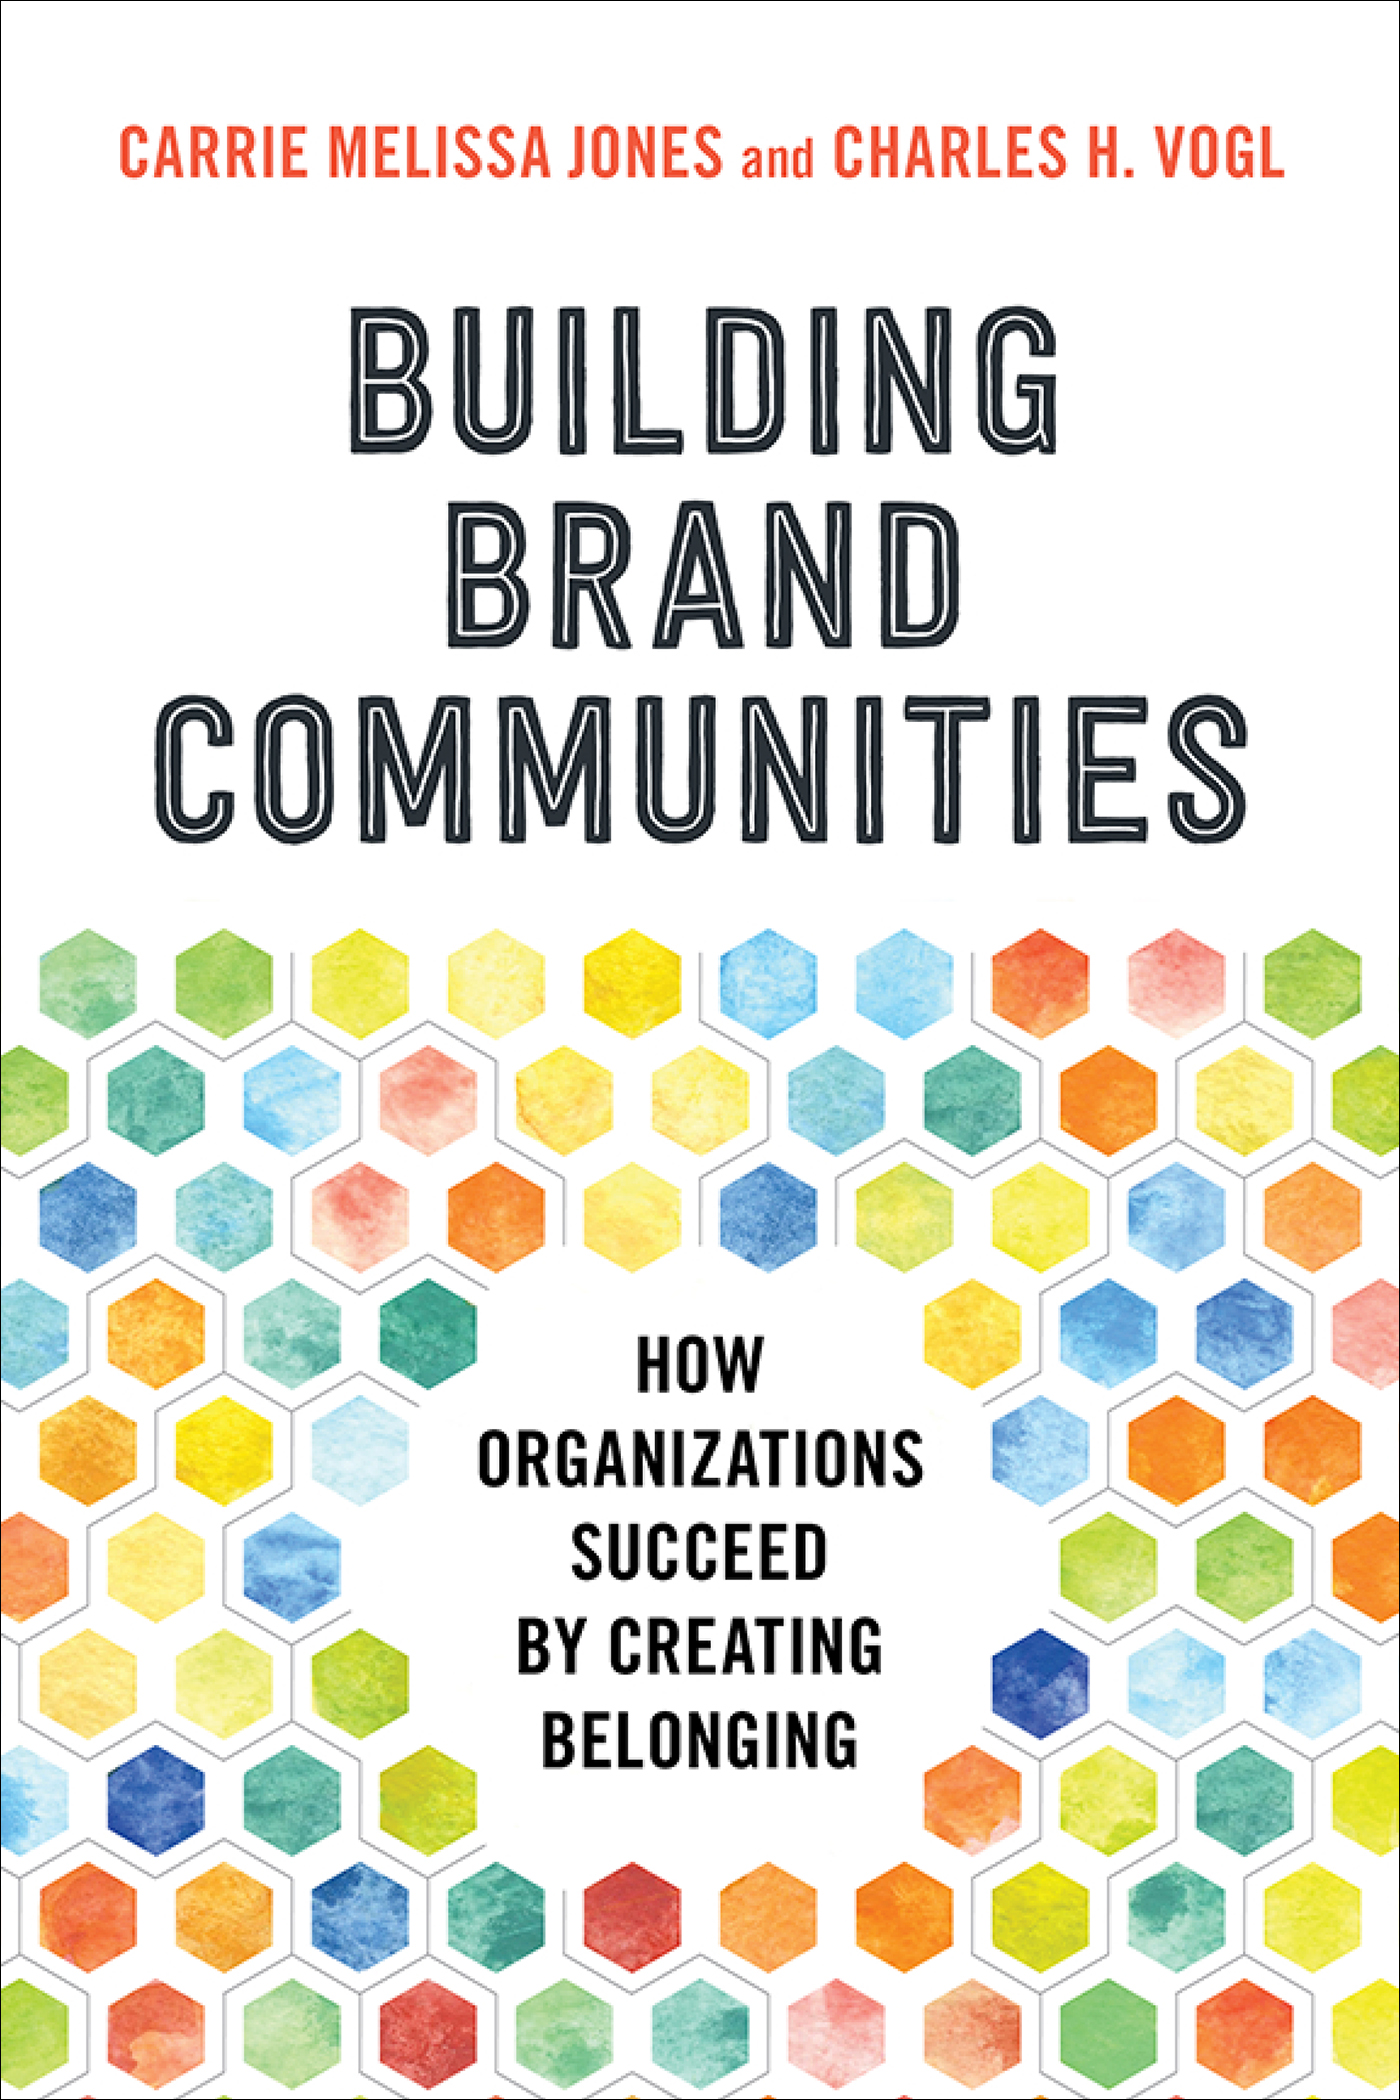 BUILDING BRAND COMMUNITIES ALSO BY CHARLES H VOGL The Art of Community 7 - photo 1